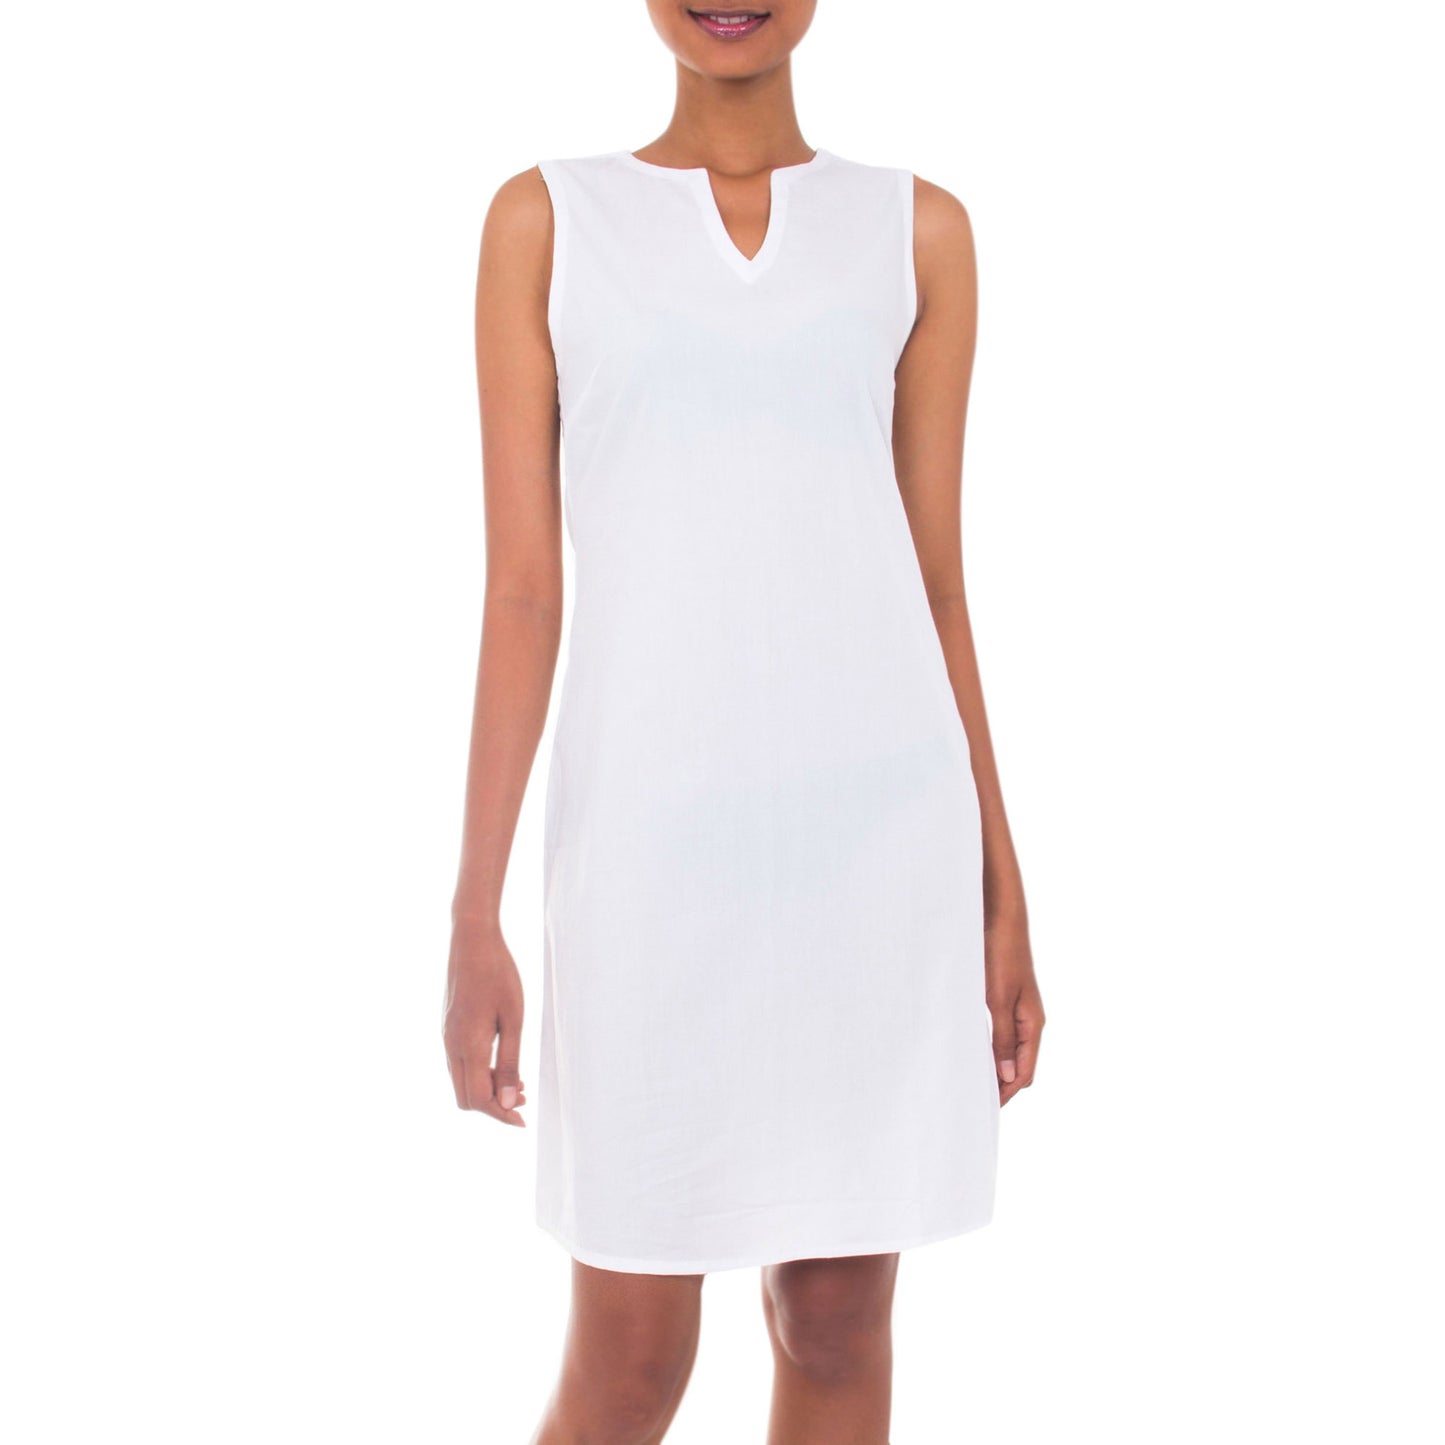 Lily in White Cotton Shift Dress